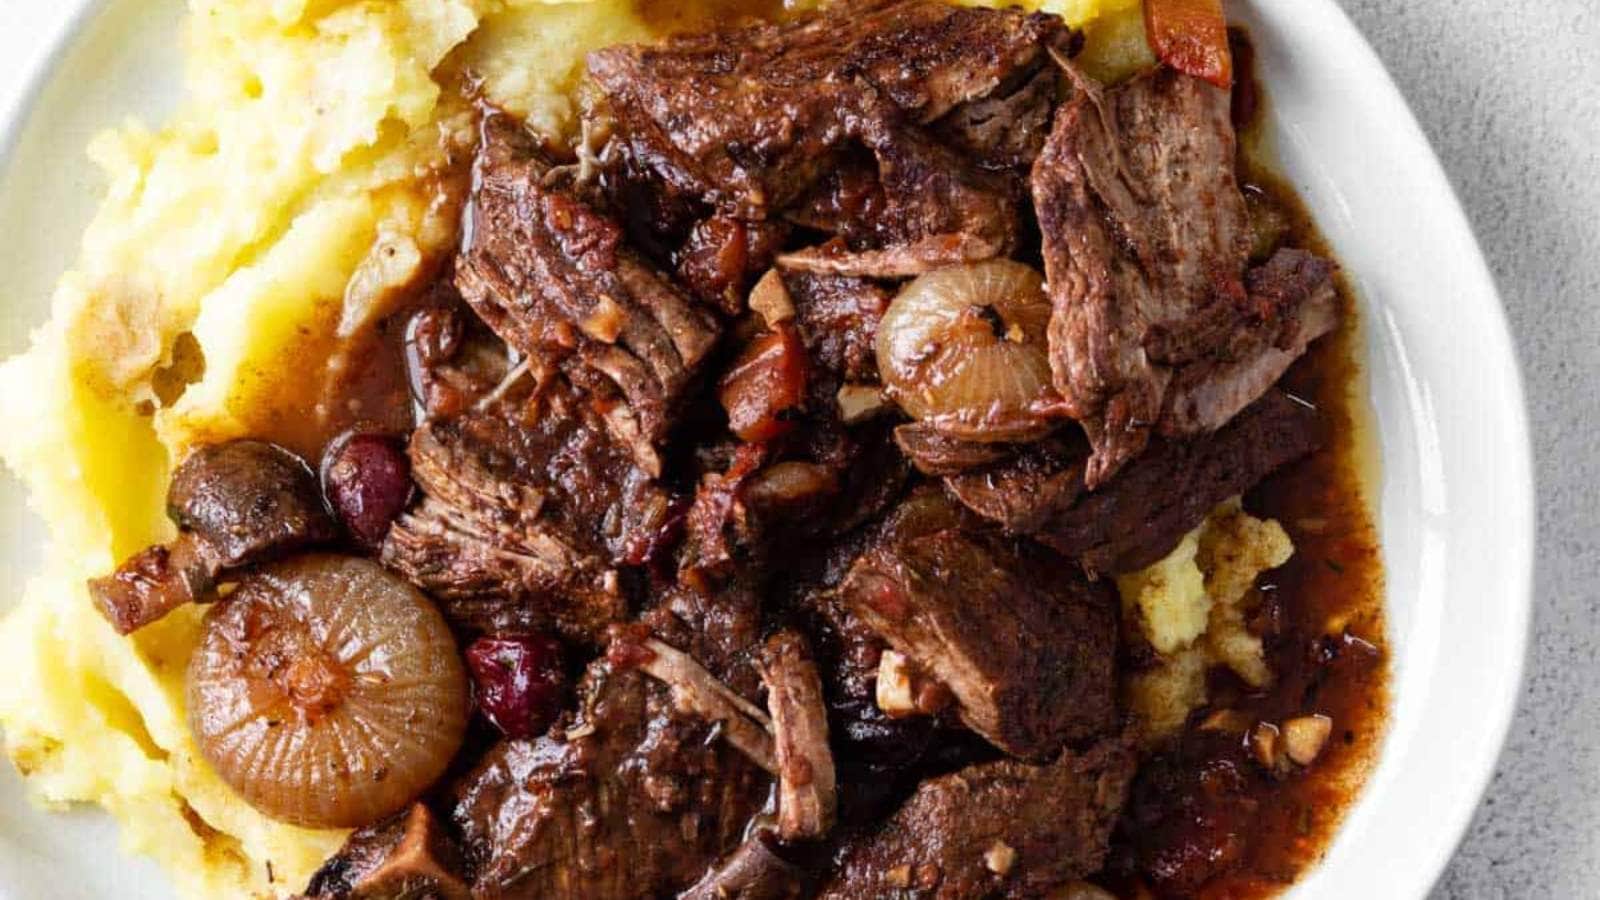 Slow Cooker Boneless Beef Ribs In Pomegranate Sauce recipe by Pass Me Some Tasty.